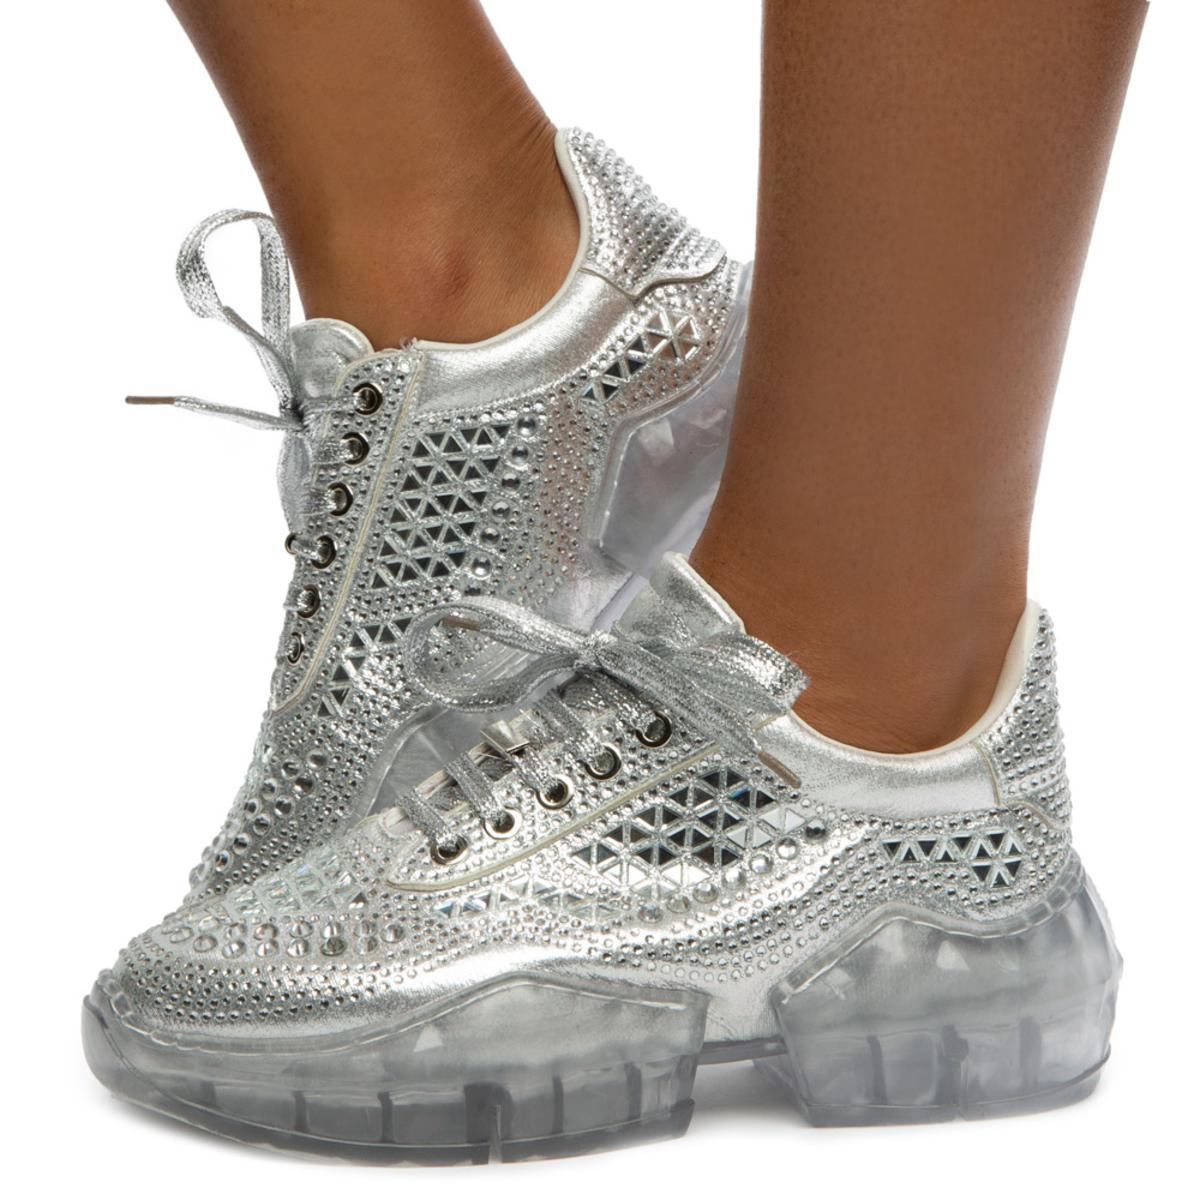 Crystal-6 Lace Sneakers